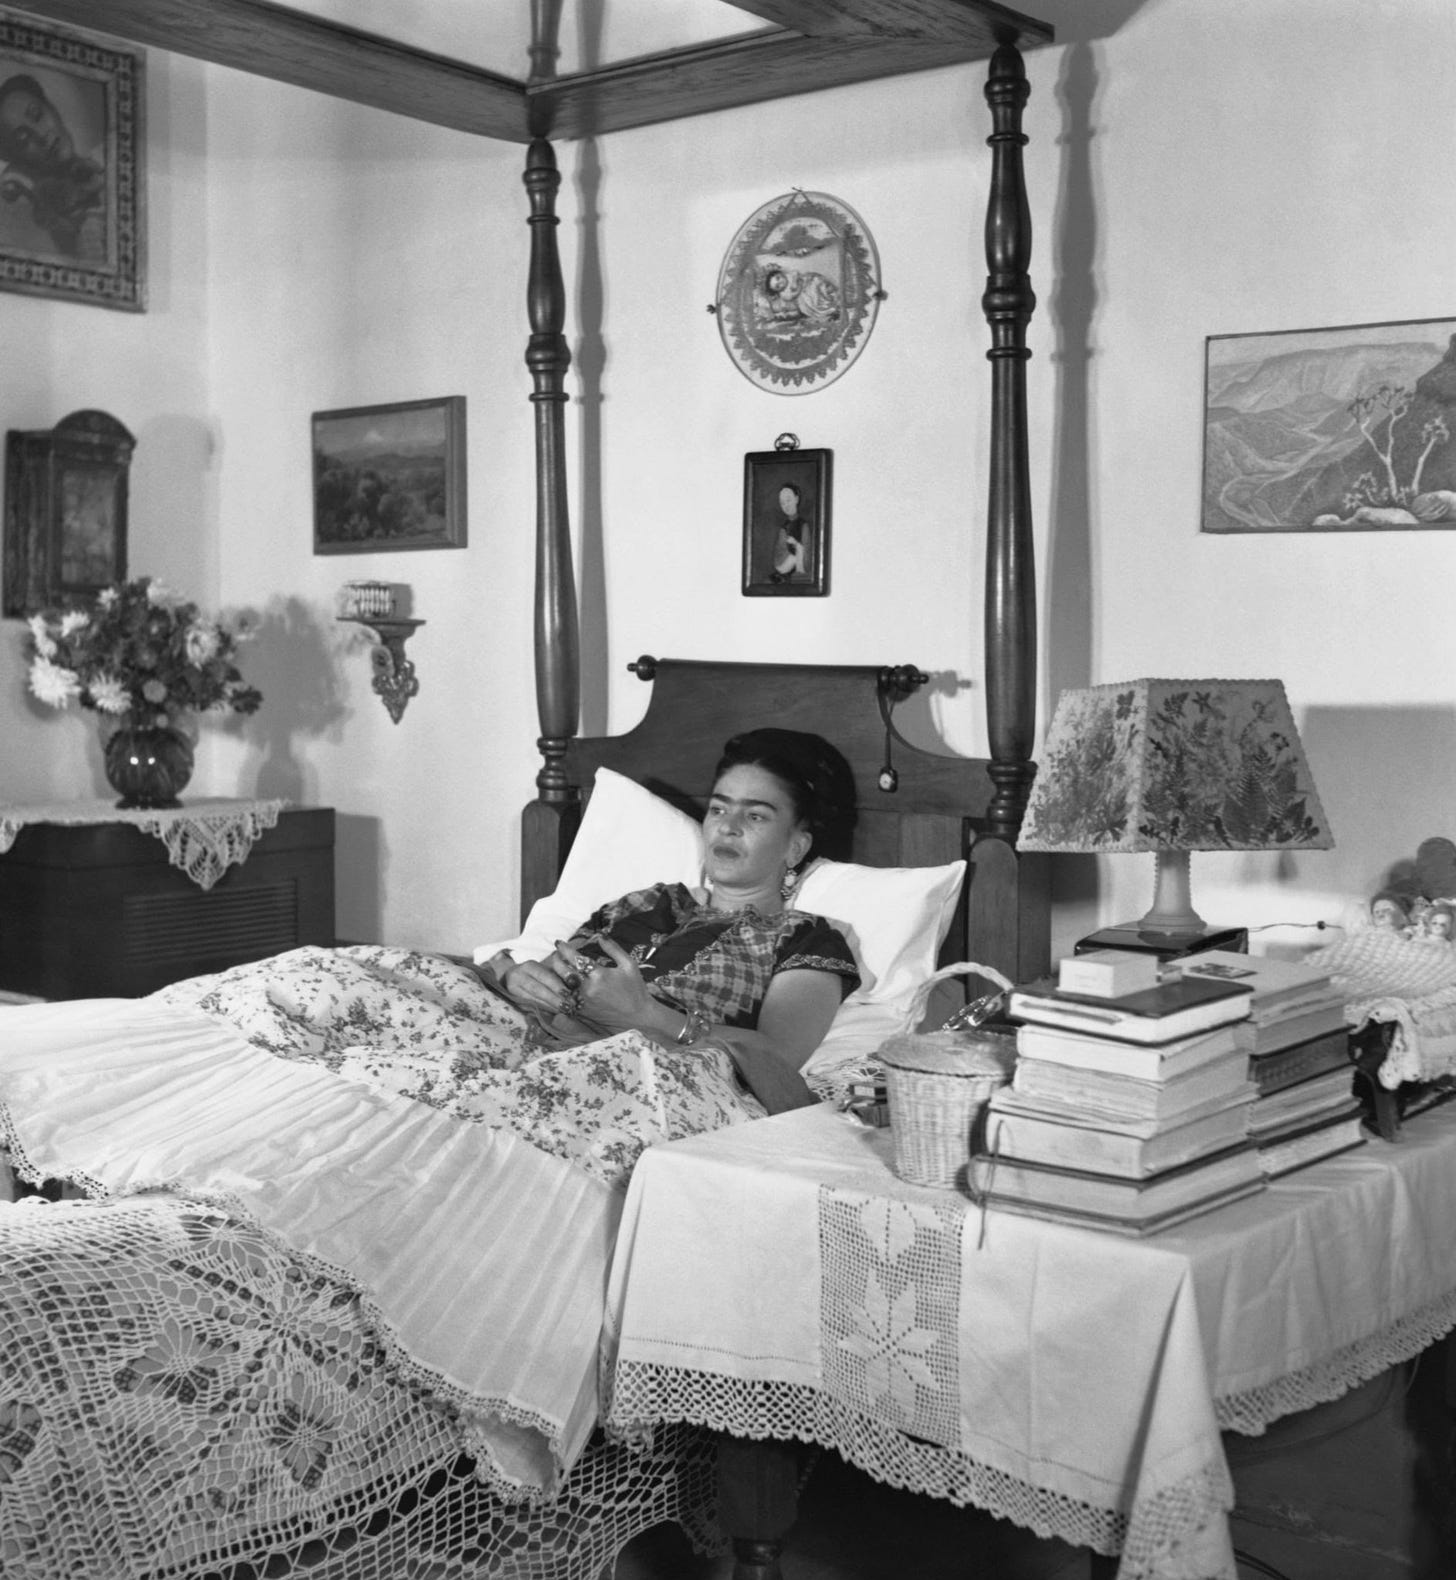 Image shows Mexican artist Frida Kahlo in her four poster bed